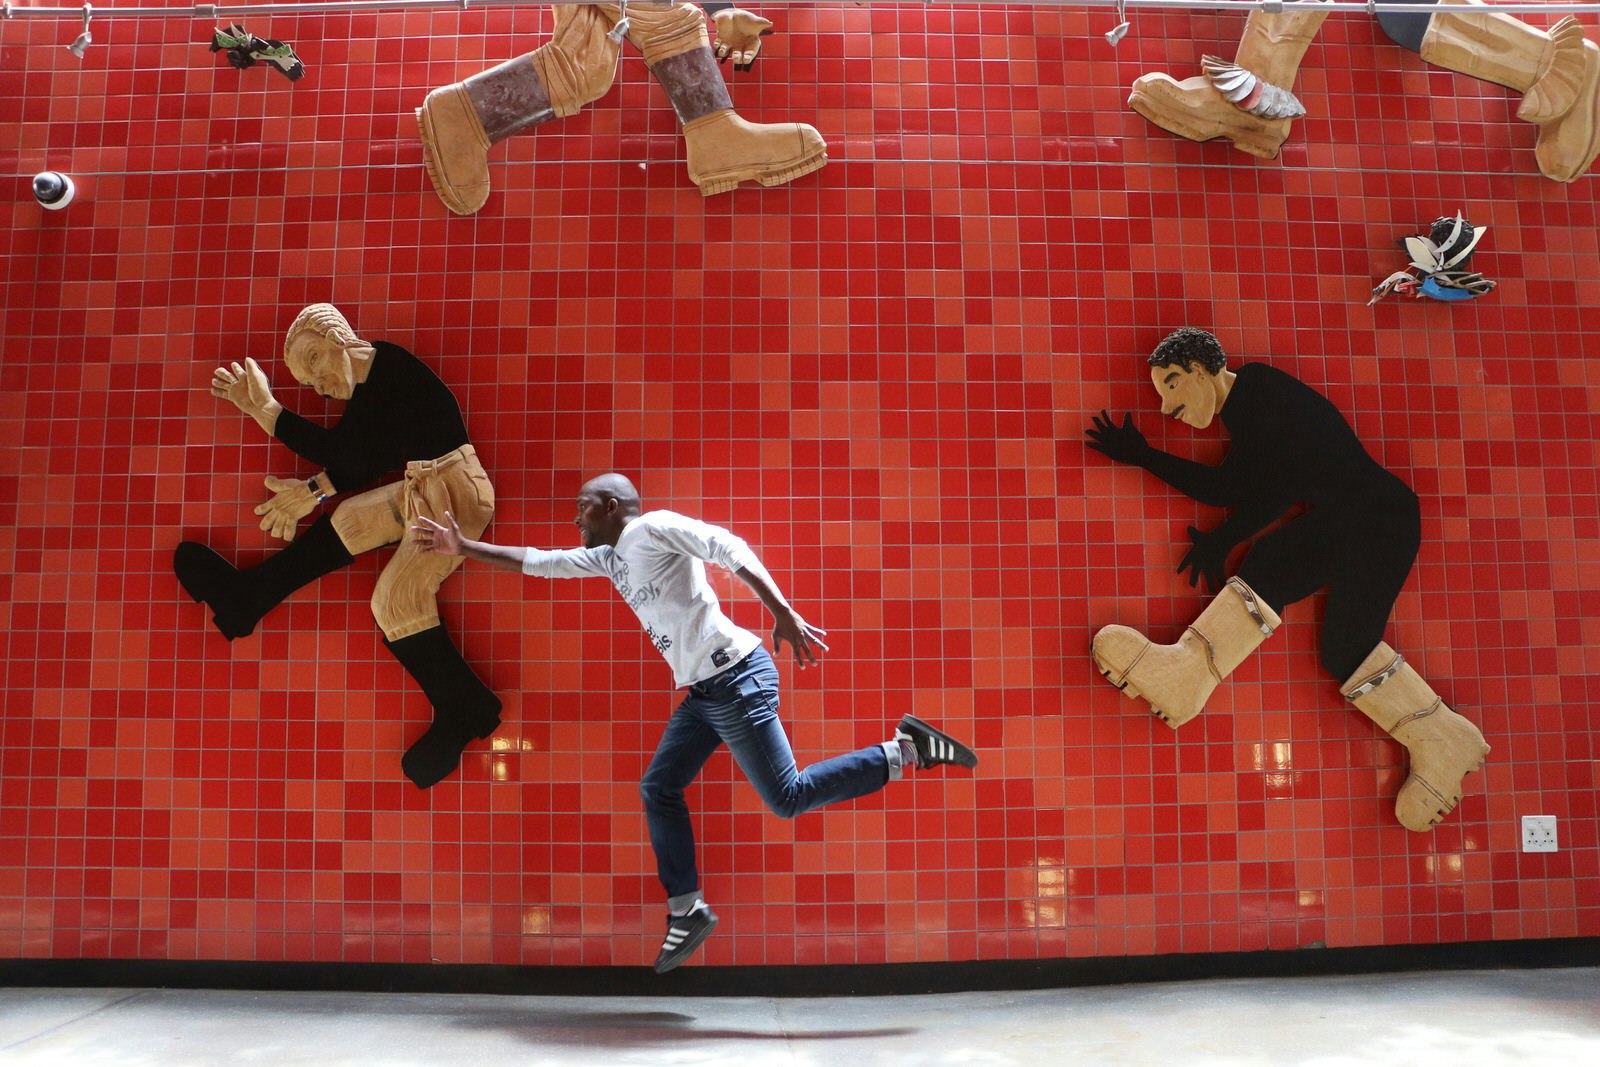 A large red-tiled wall is adorned with simplistic-looking human figures in various jumping positions. In the foreground an actor has been captured leaping in the air in a similar position © Simon Richmond / Lonely Planet